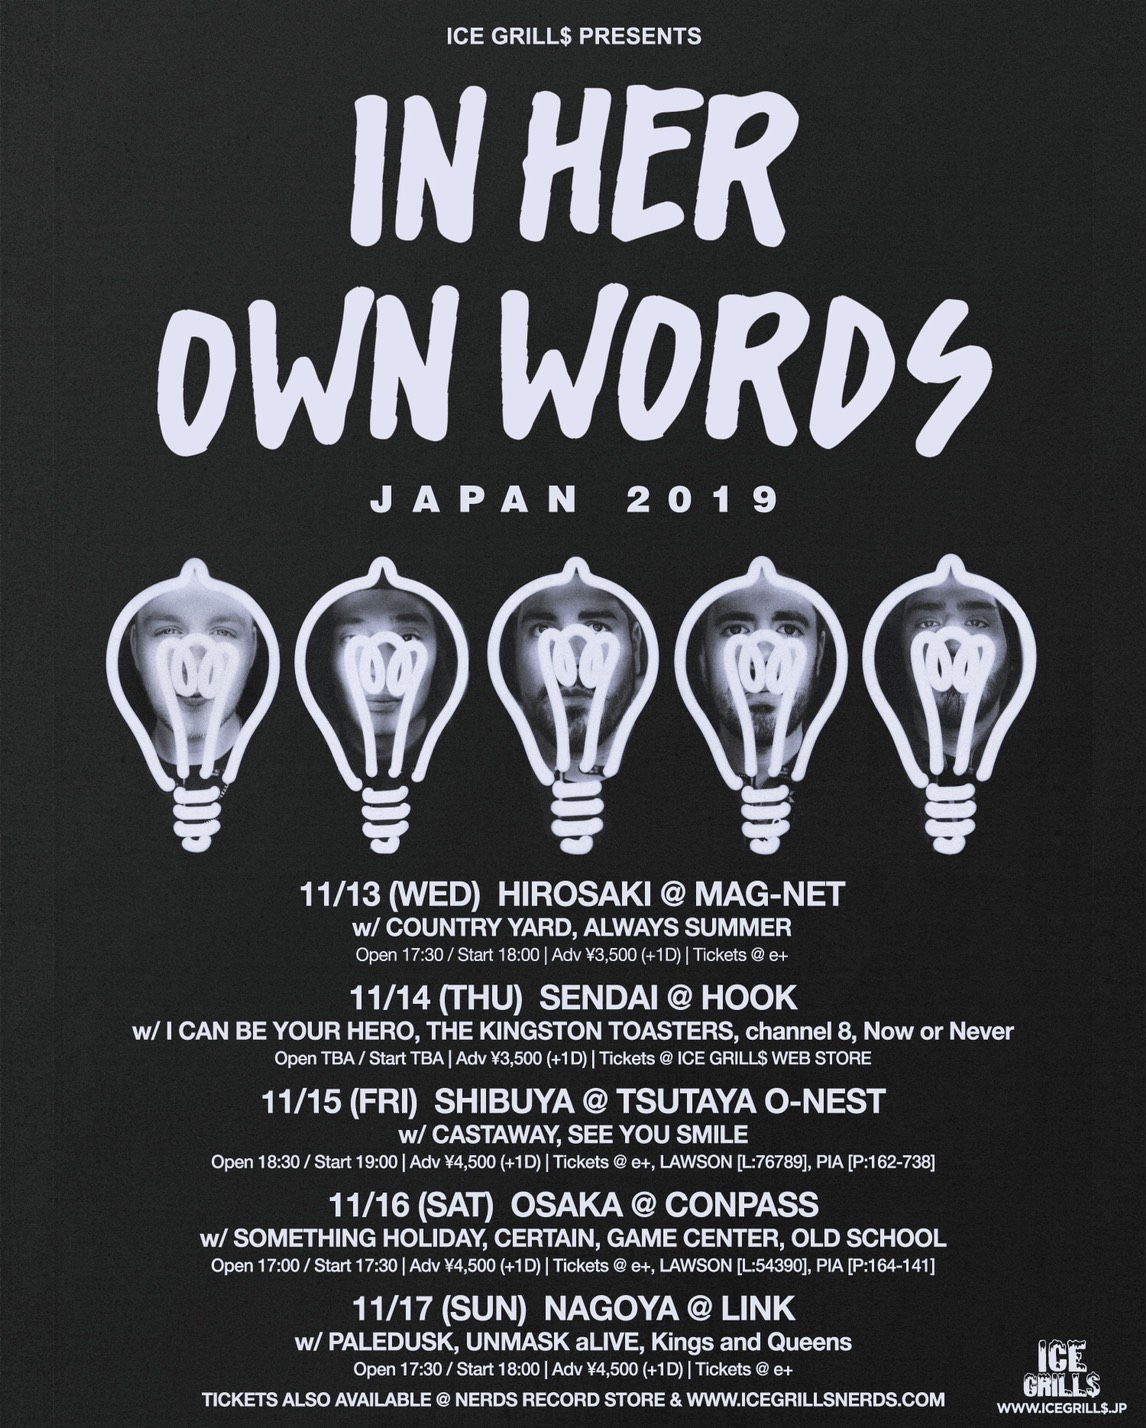 ICE GRILLS pre. IN HER OWN WORDS japan tour 2019